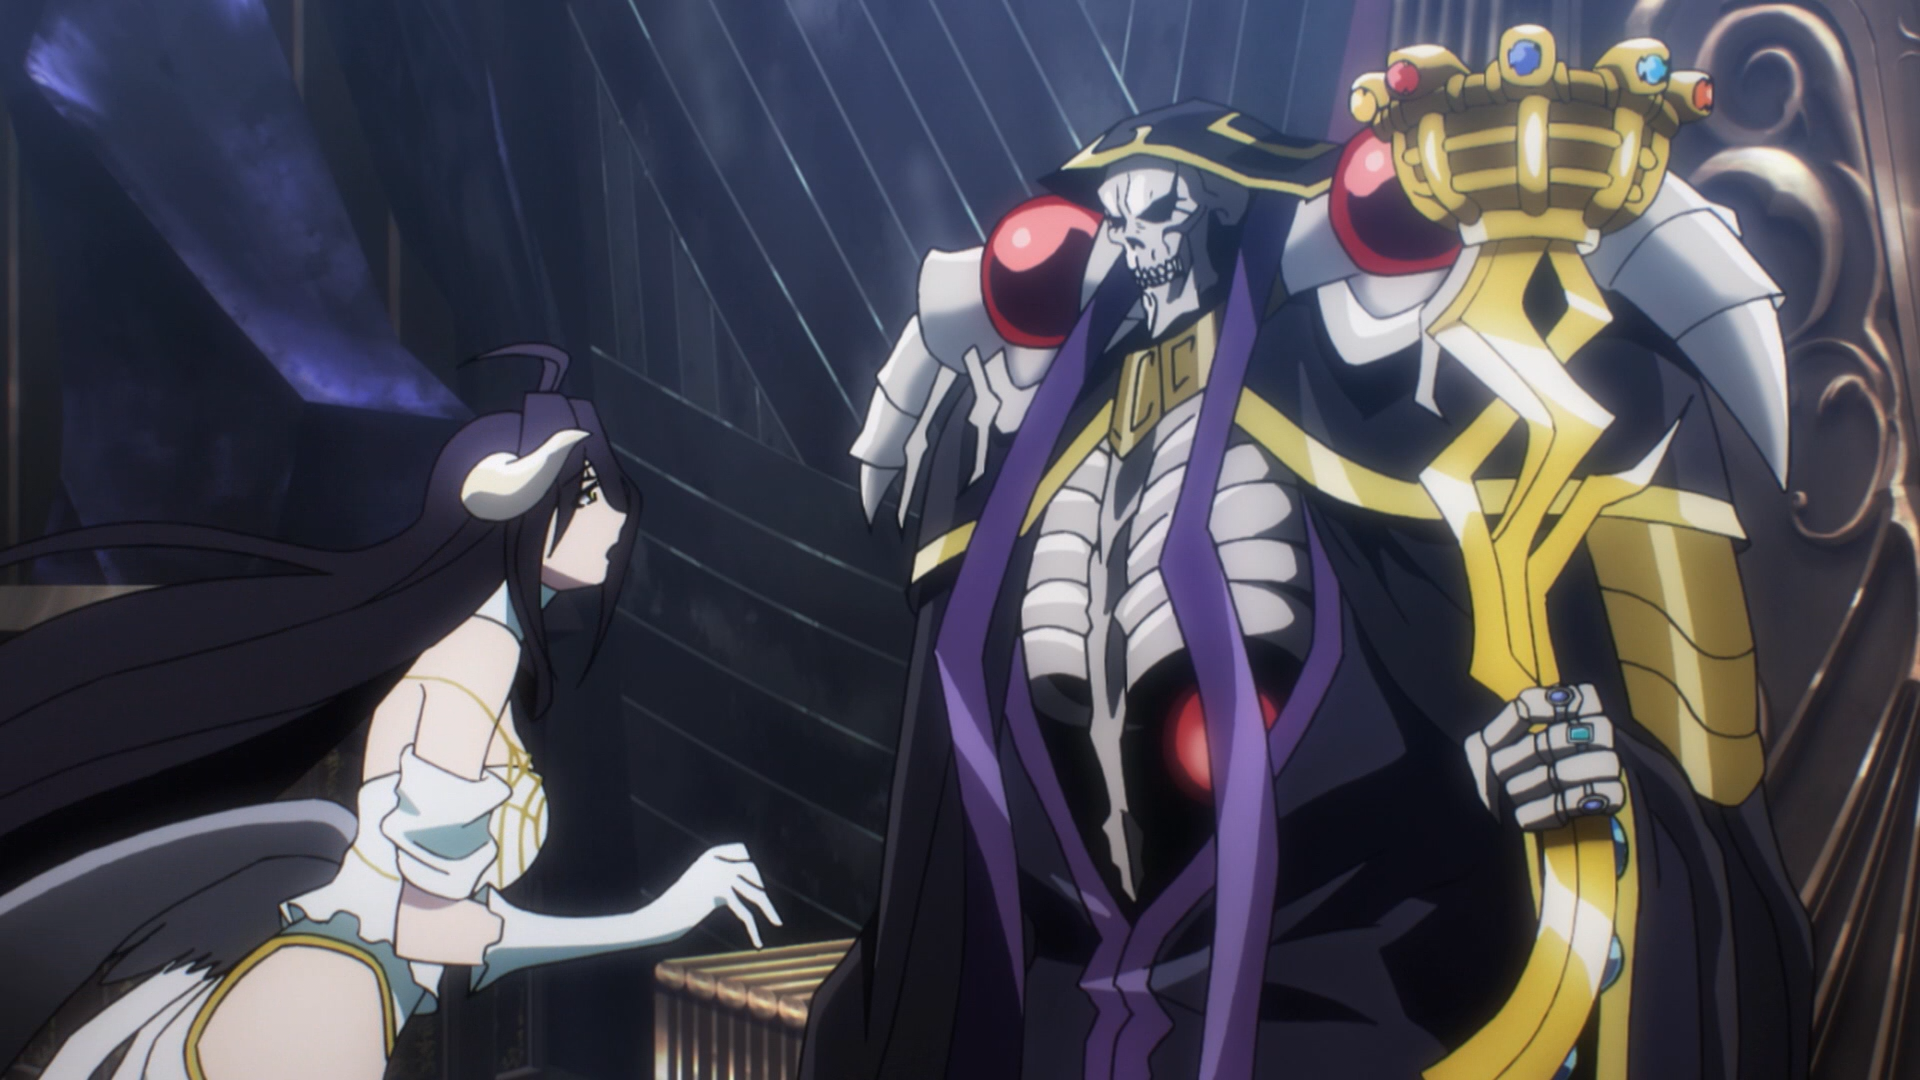 Albedo And Ainz Ooal Gown, Ainz Ooal Gown With Albedo - Ainz Ooal Gown And Albedo , HD Wallpaper & Backgrounds